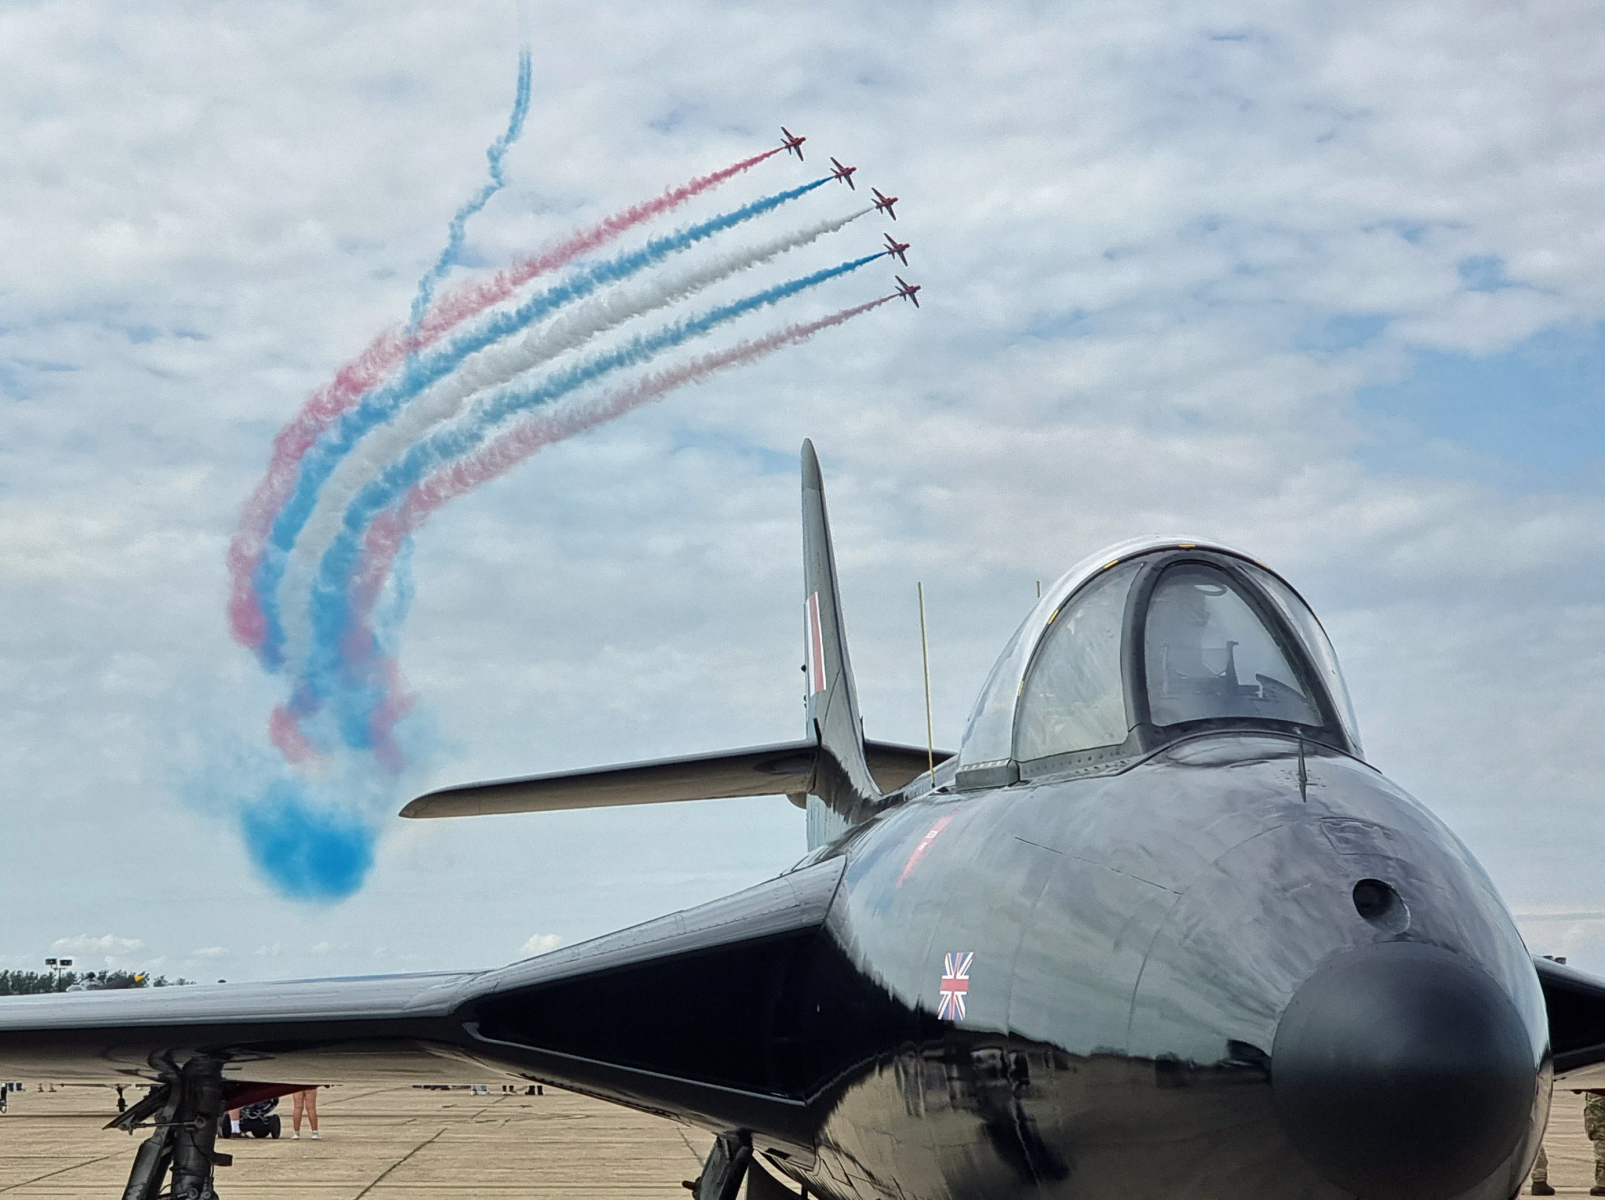 Hunter and Red Arrows